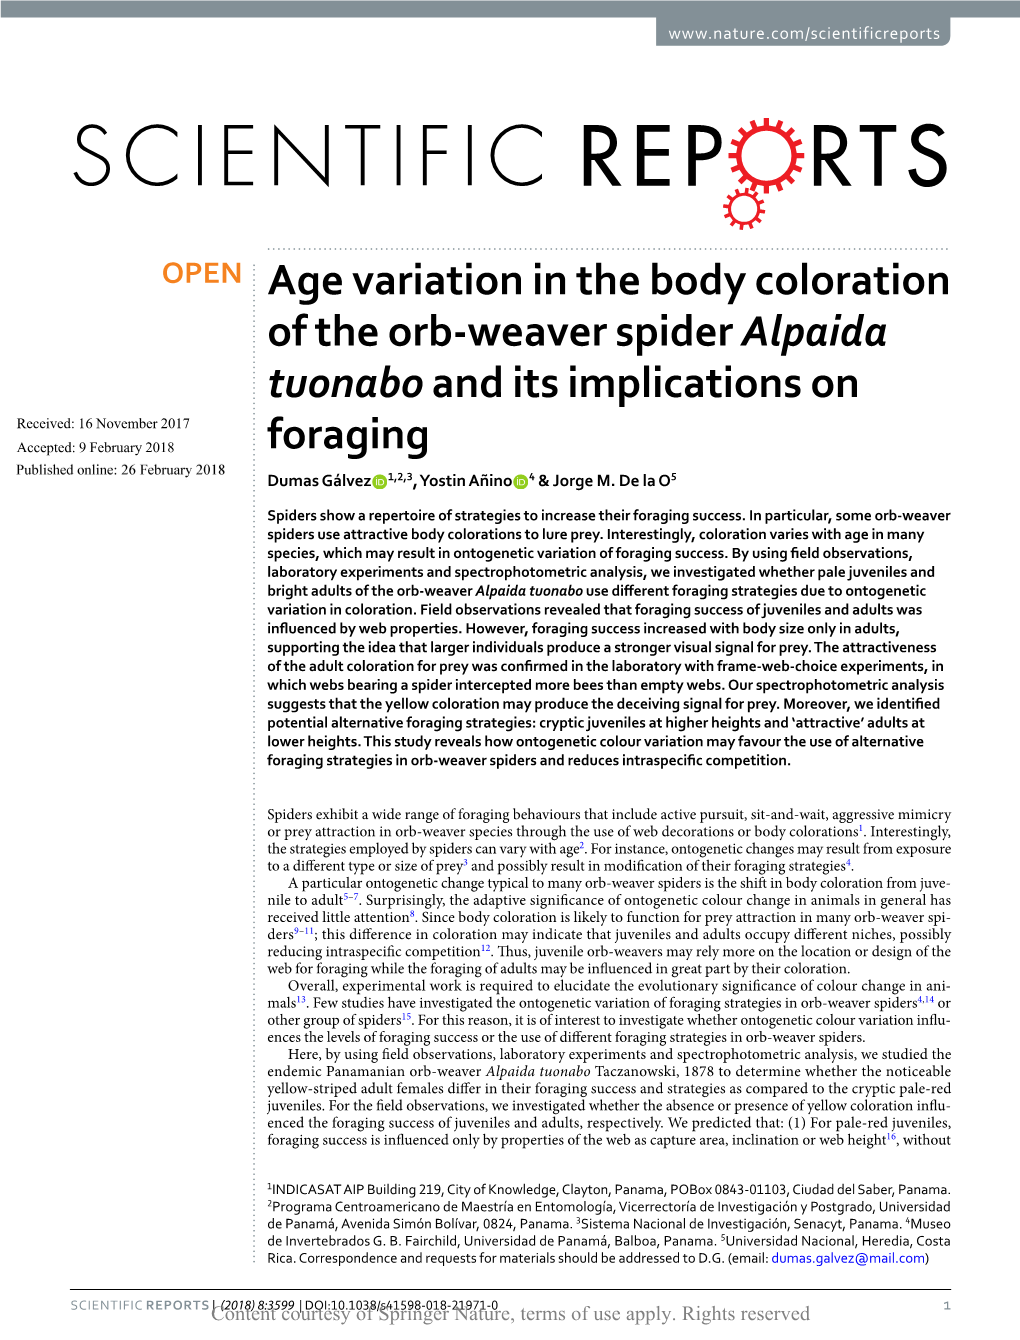 Age Variation in the Body Coloration of the Orb-Weaver